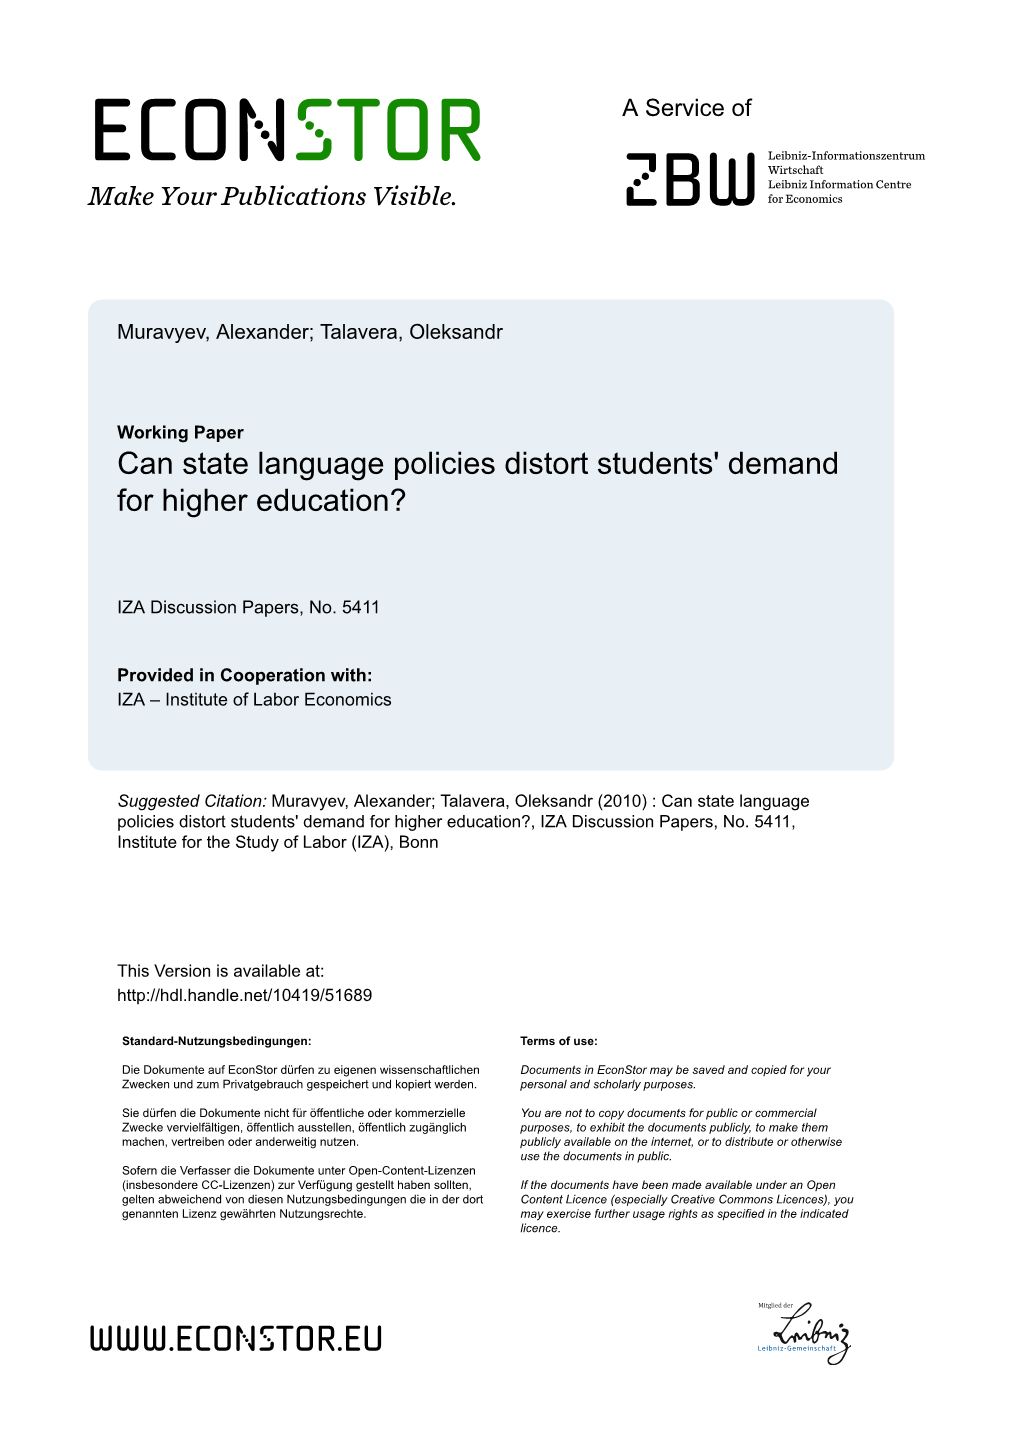 Can State Language Policies Distort Students' Demand for Higher Education?